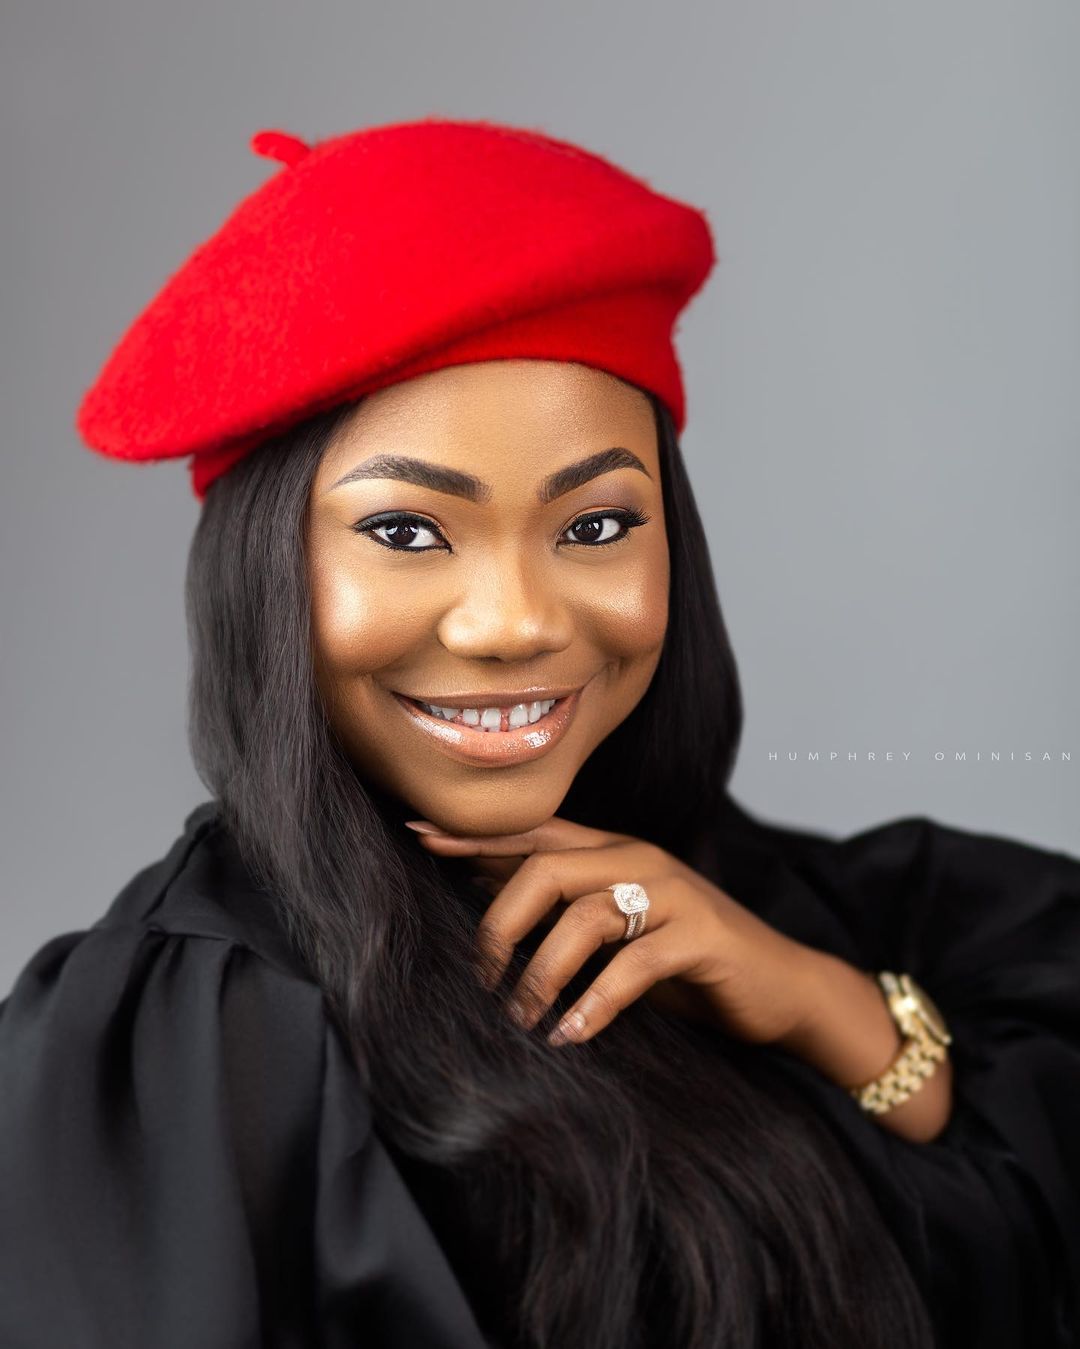 Mercy Chinwo: Biography, Education, 5 Important Things To Know About Her